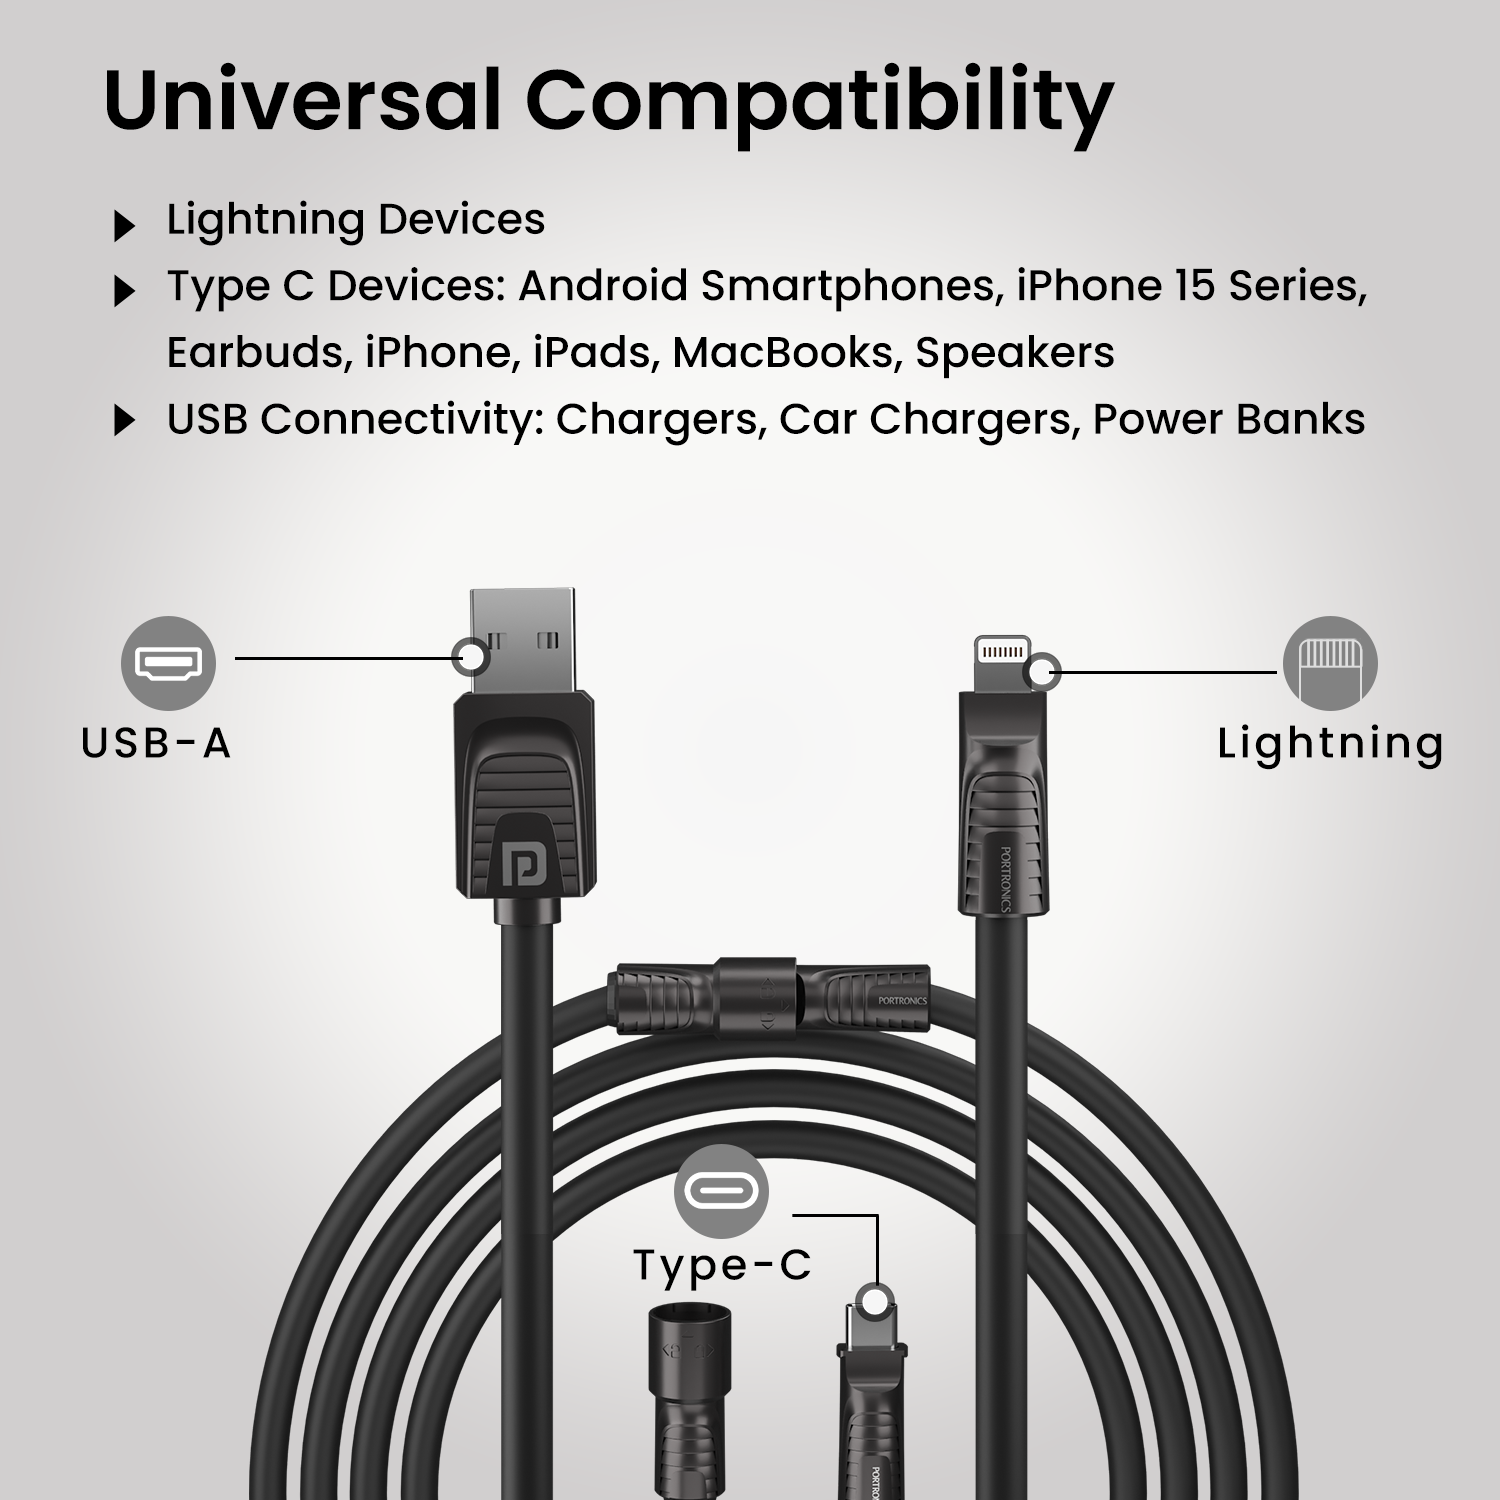 Black Portronics Konnect Tetra 4 in 1 type c to type c charging cable with universal compatibility for lightning devices